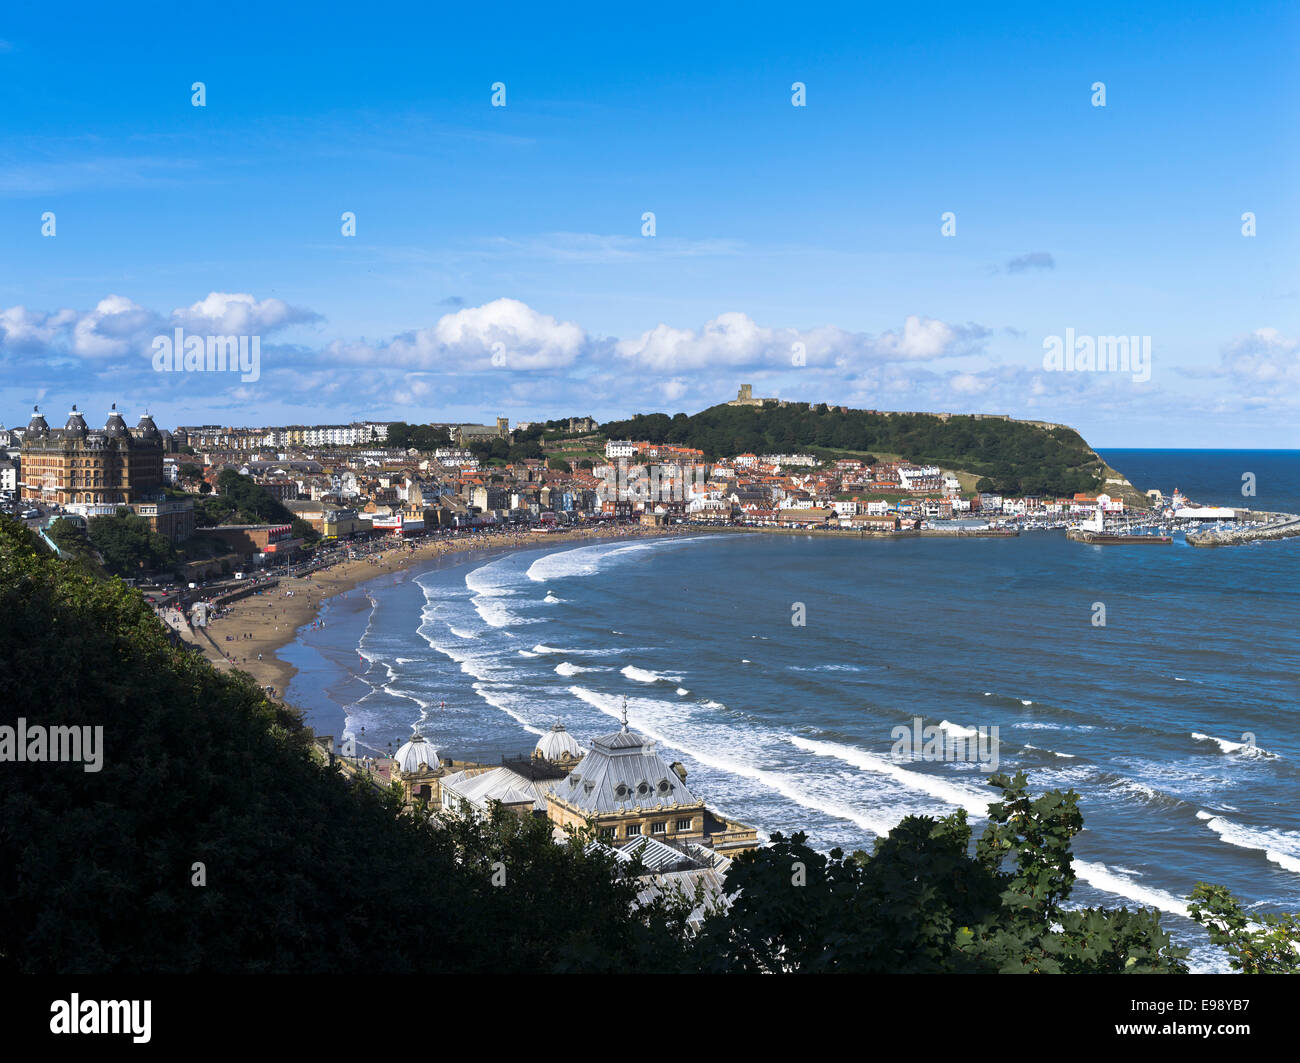 dh South Bay SCARBOROUGH NORTH YORKSHIRE futurist south beach scarborough castle harbour sea summer uk seaside sands england coast town Stock Photo